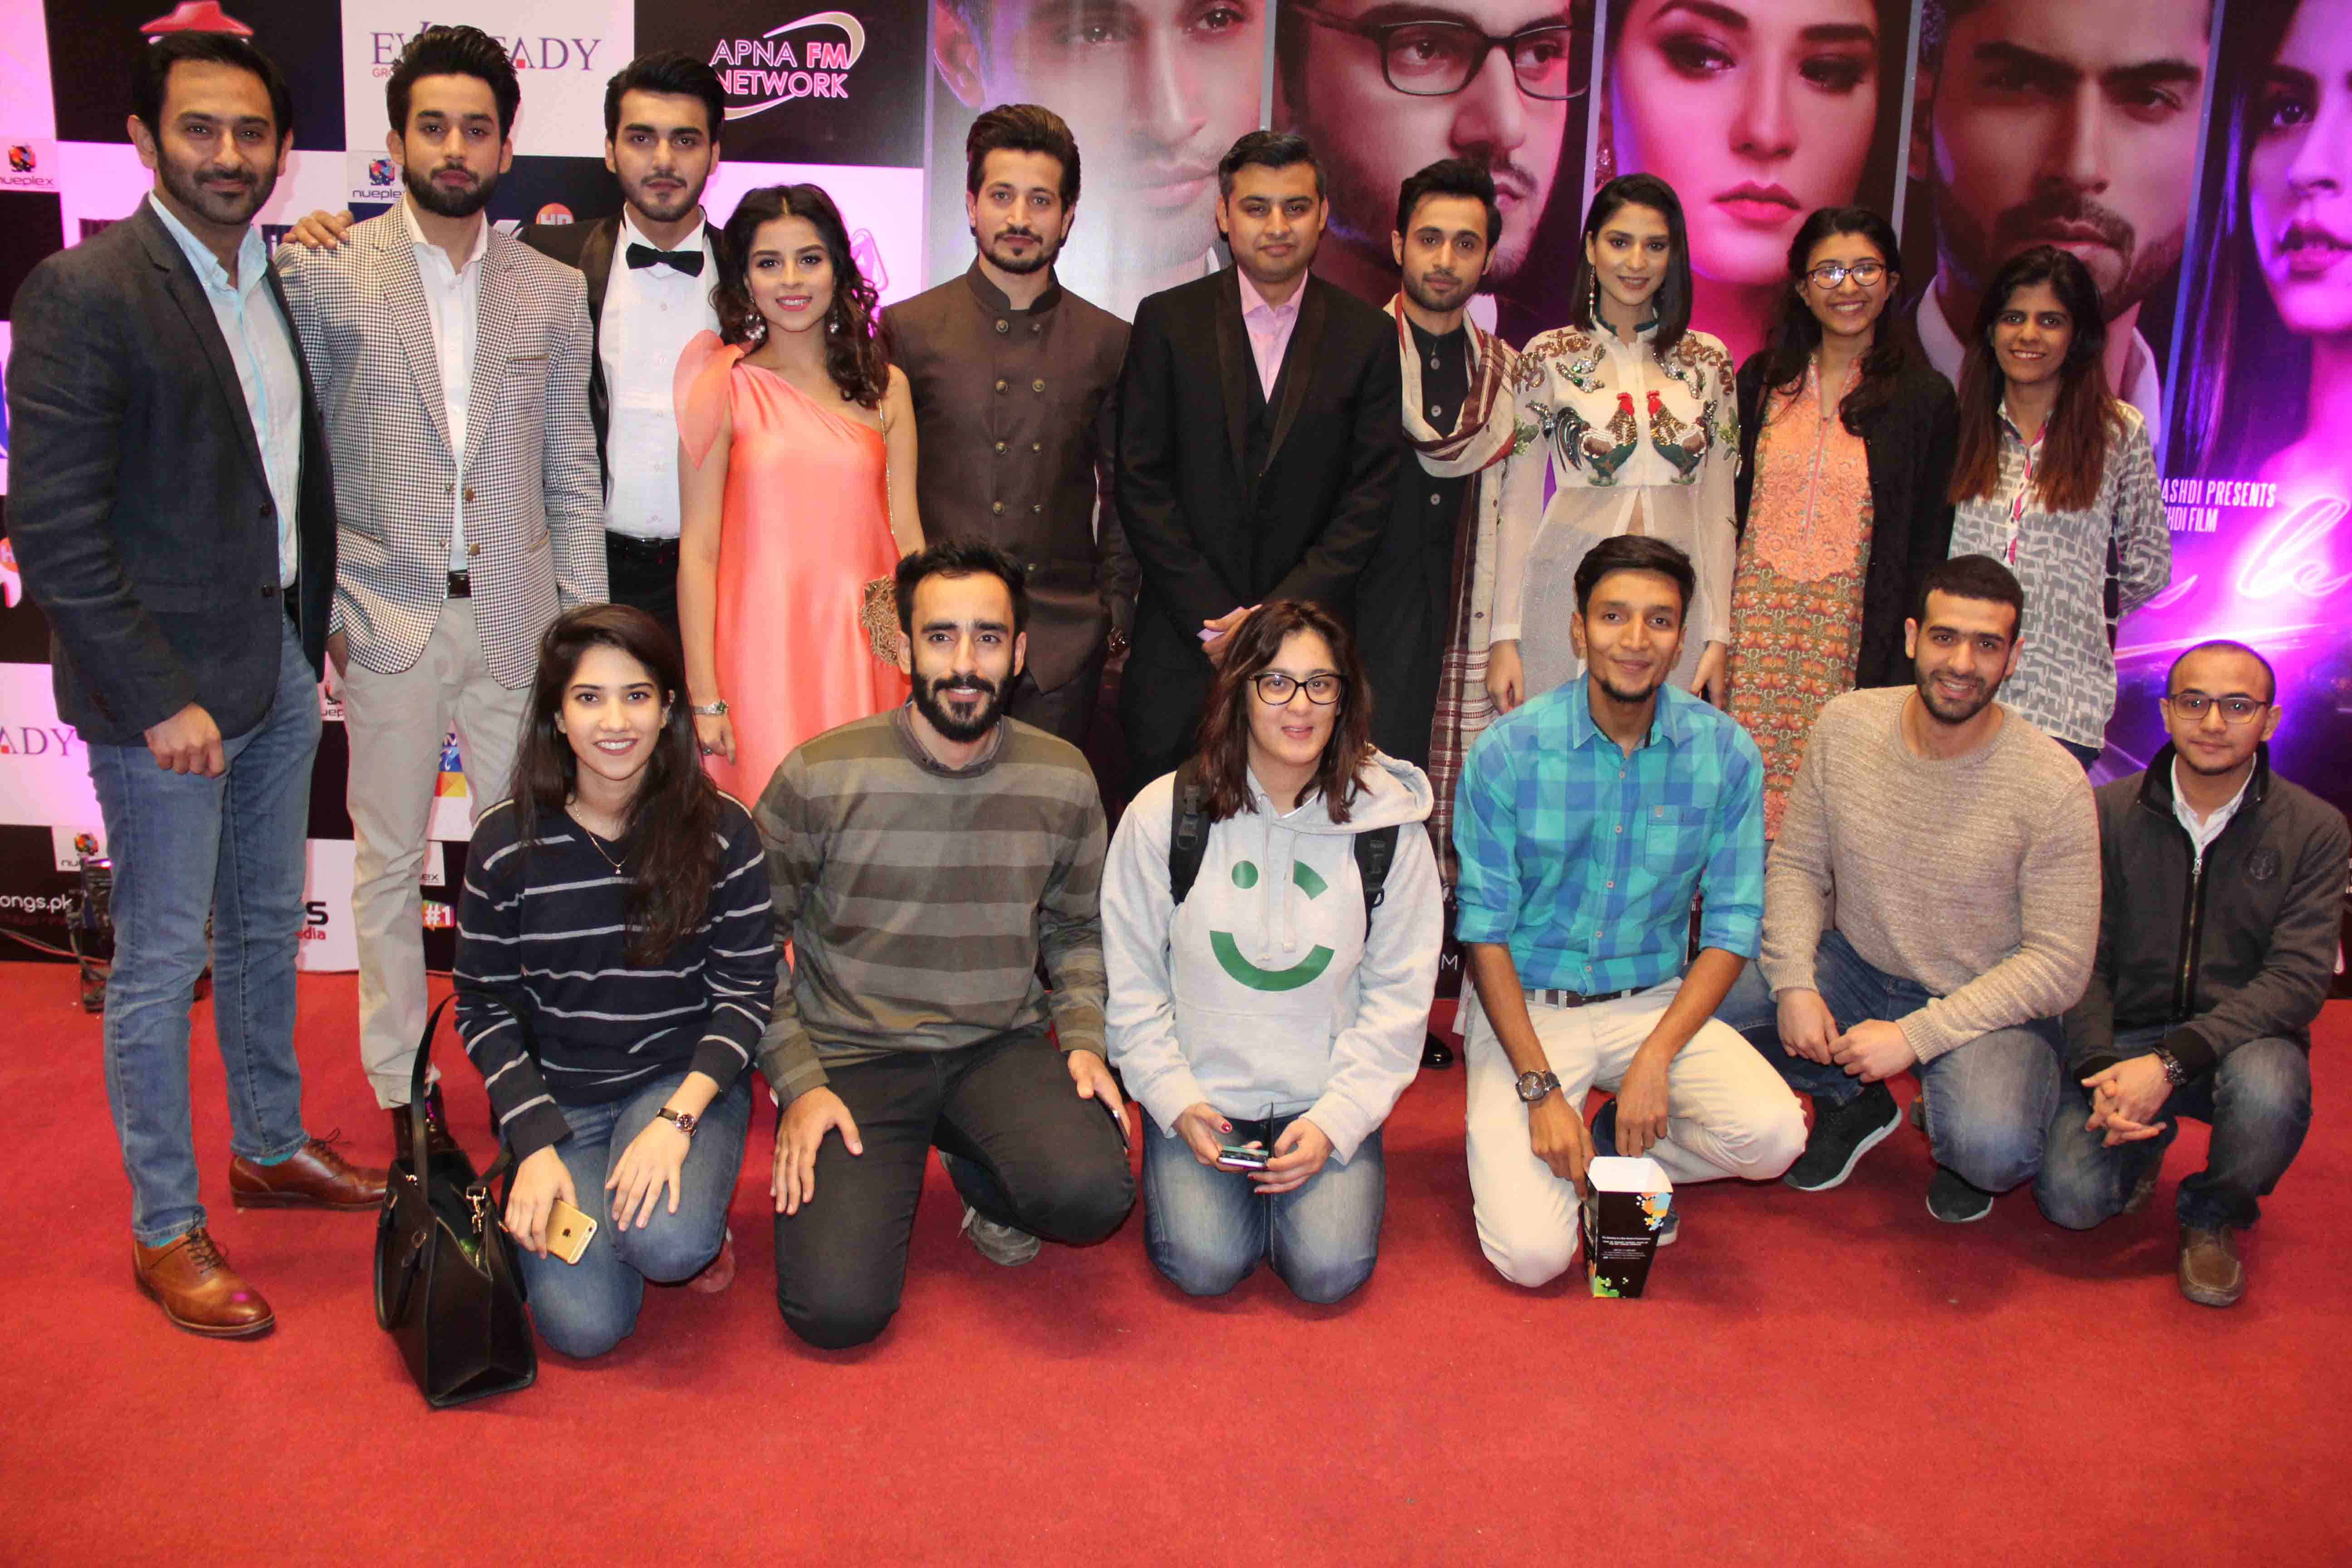 post-report-star-studded-premiere-for-thora-jee-le-held-in-karachi-3